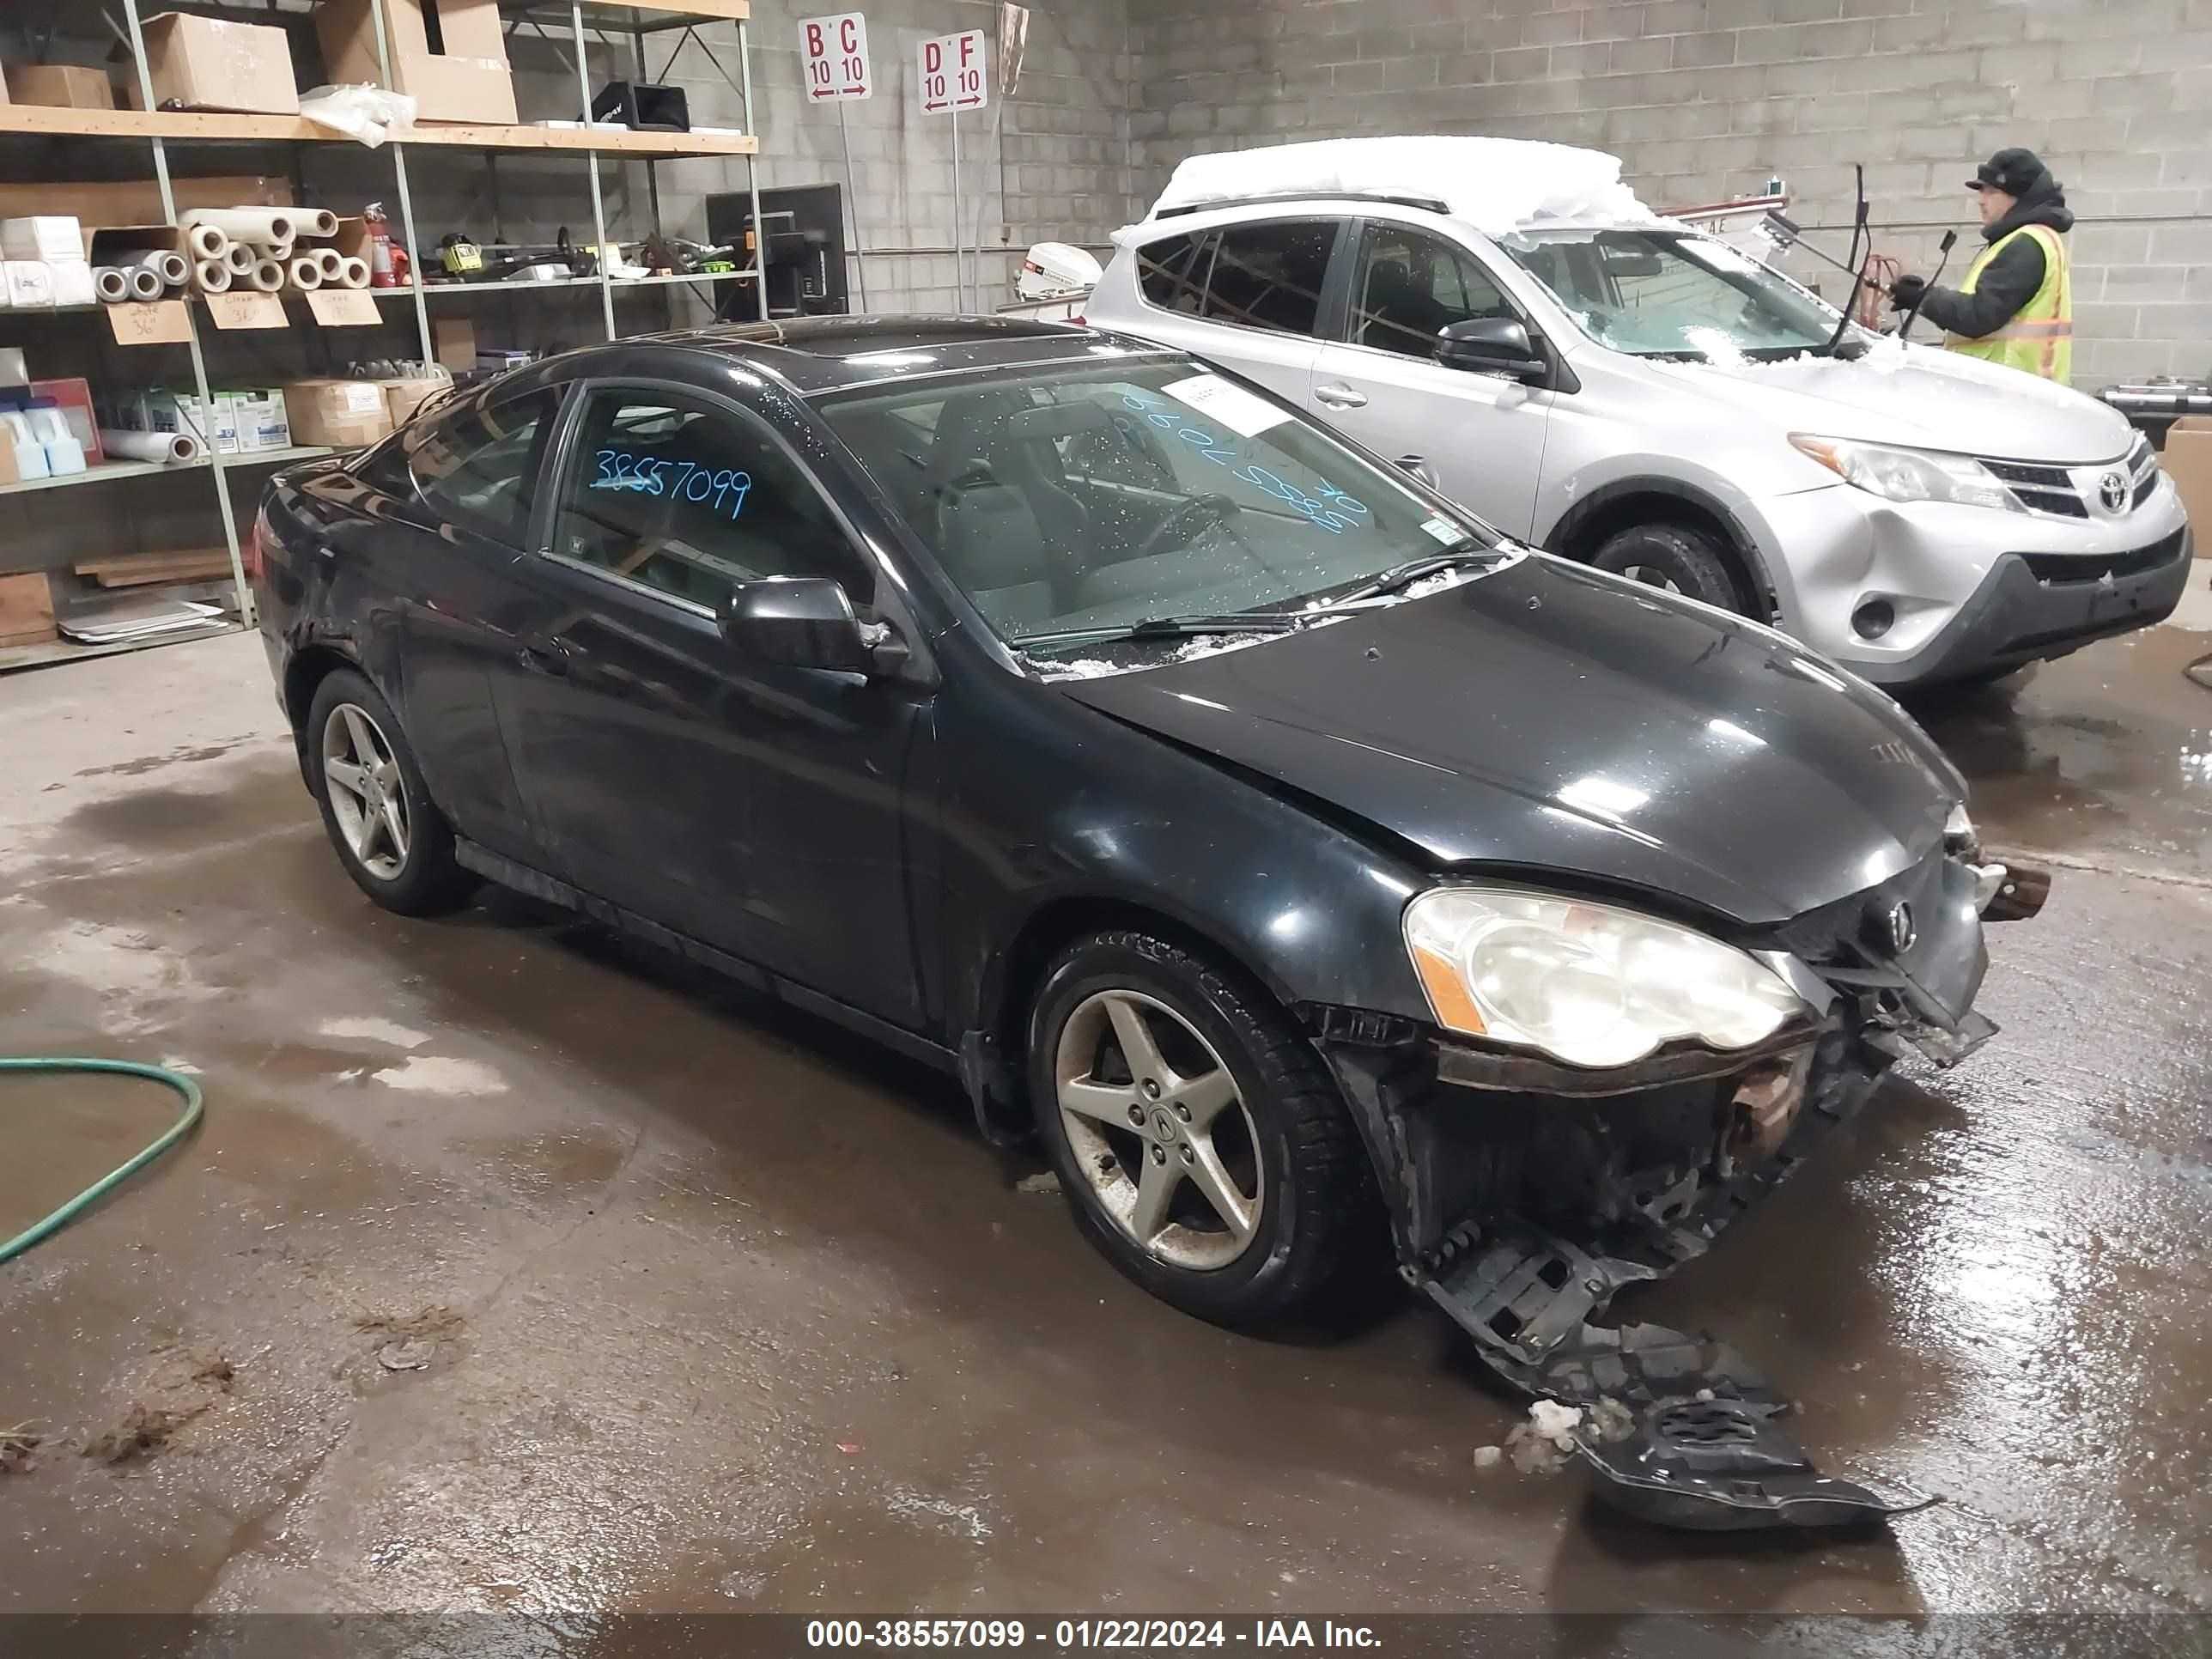 VIN: JH4DC53004S018847 - acura rsx